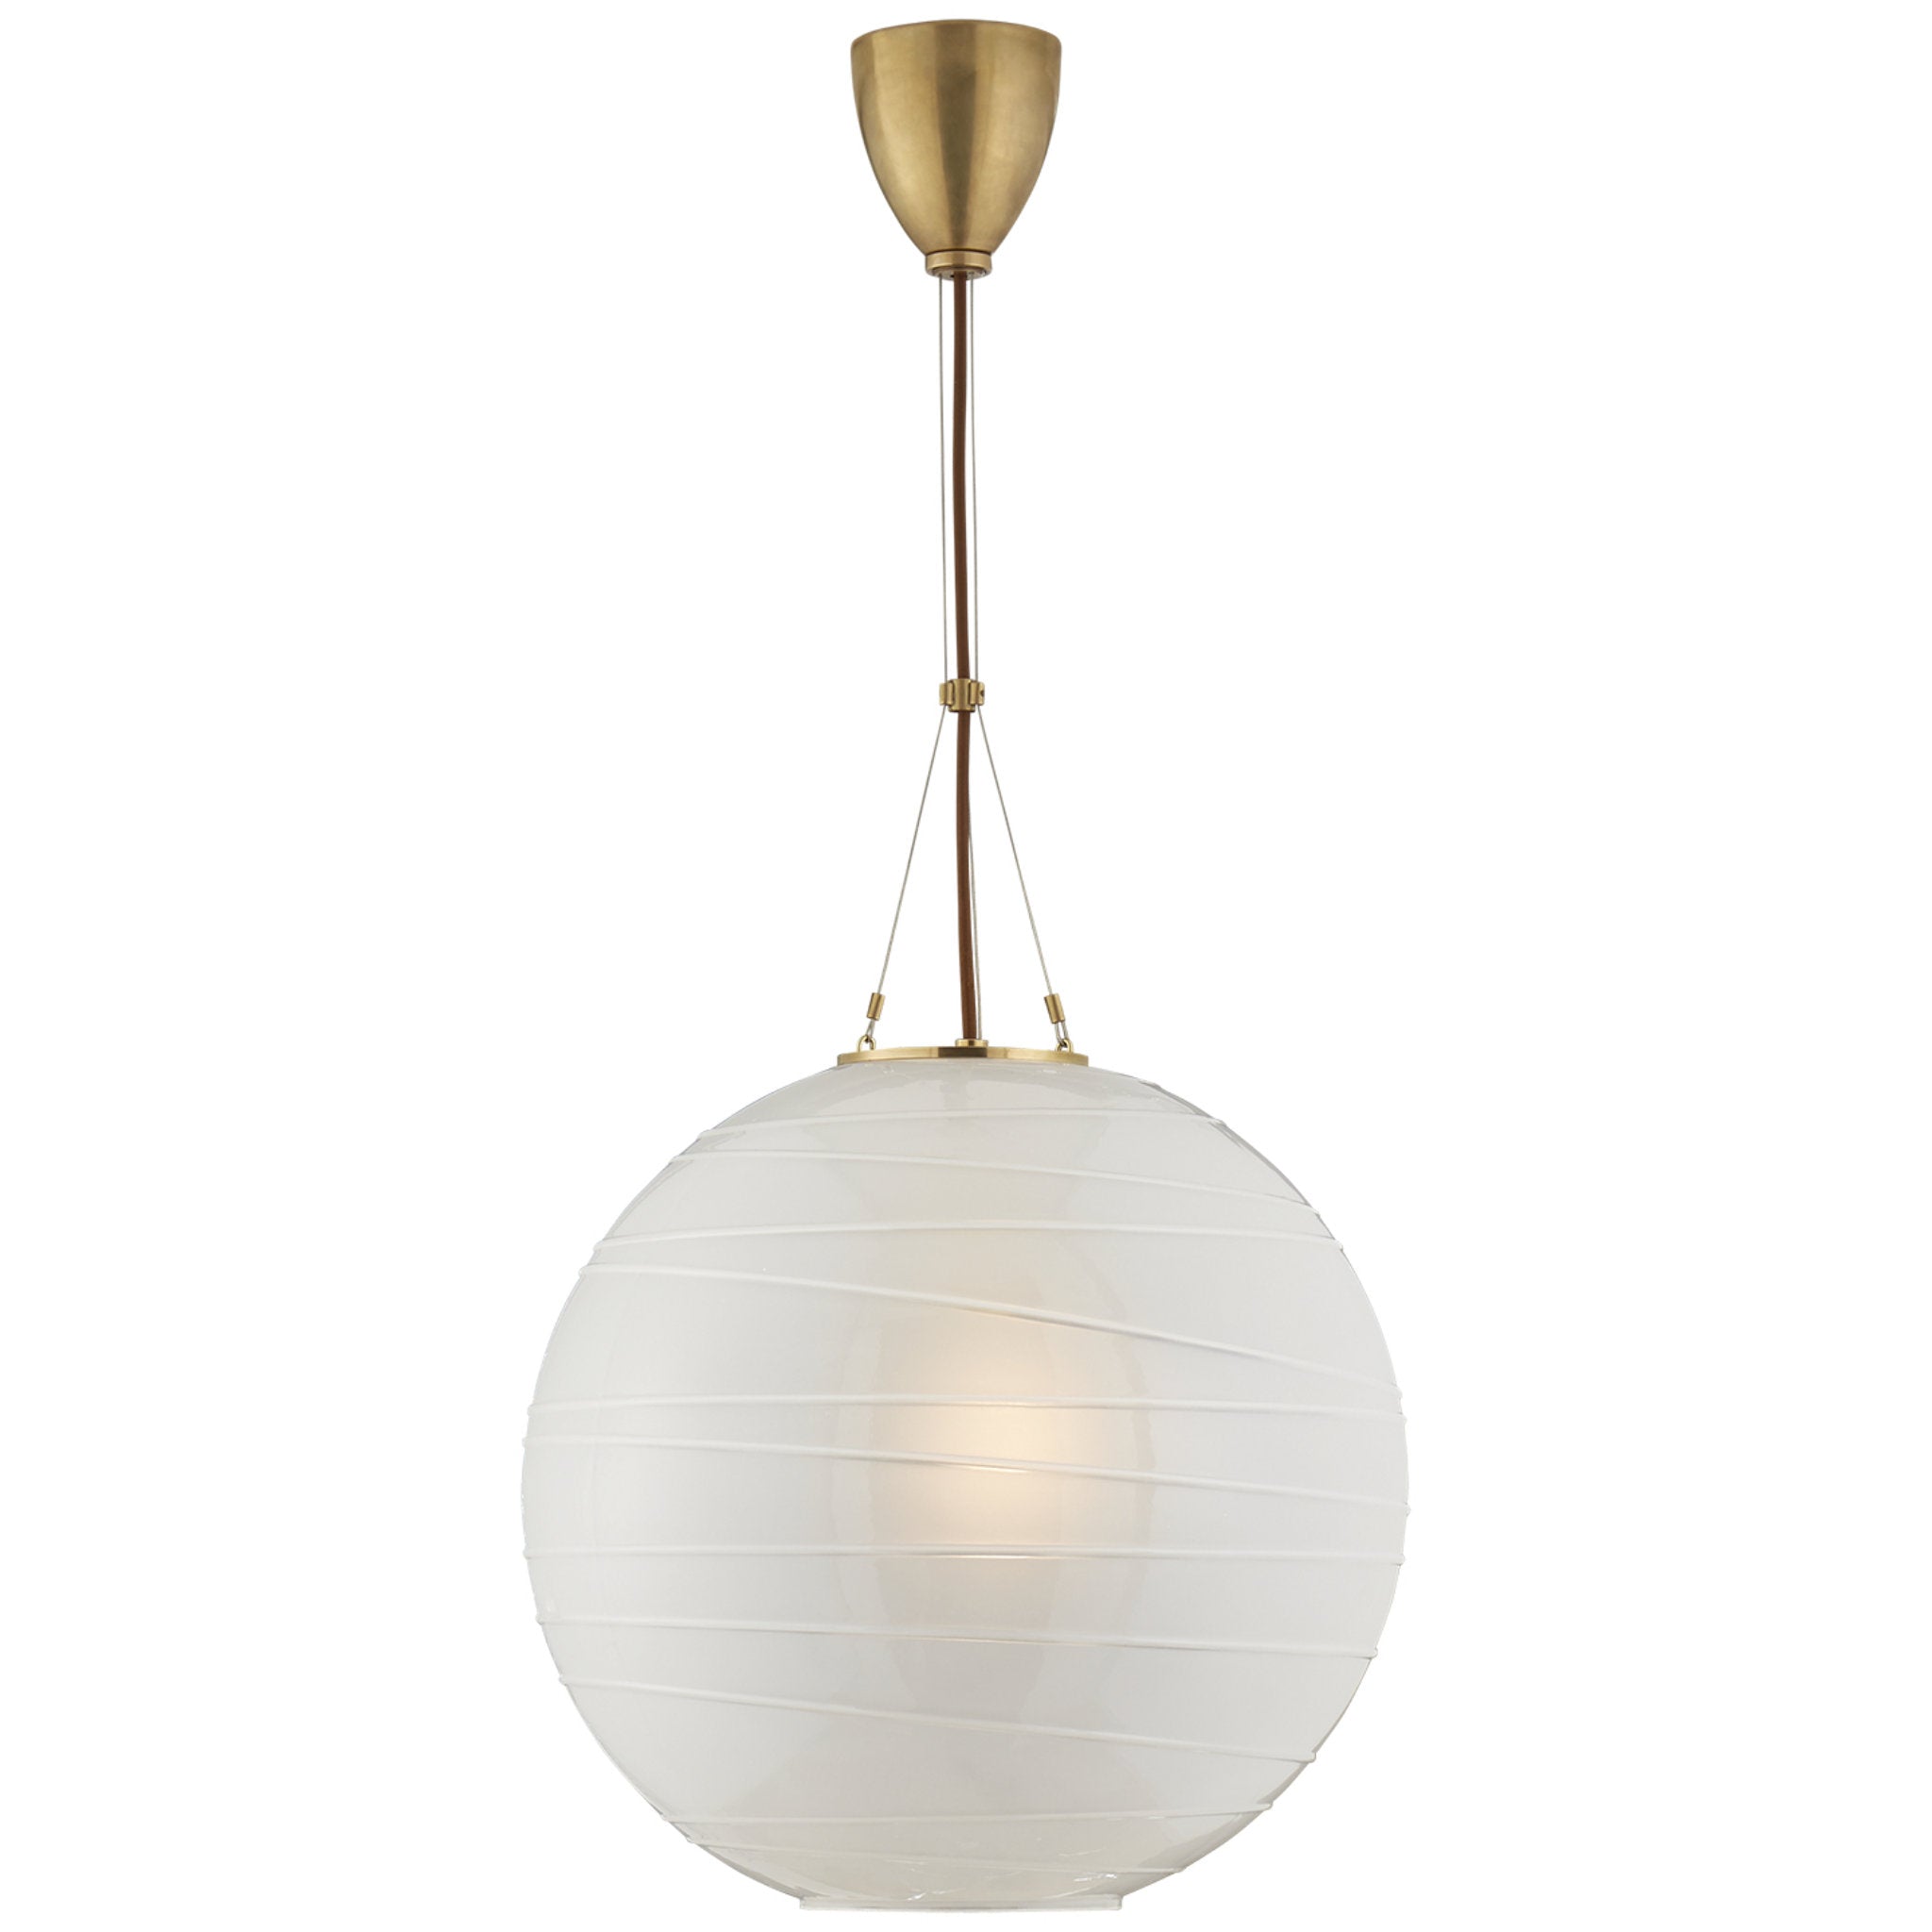 Alexa Hampton Hailey Medium Round Pendant in Natural Brass with Frosted Glass